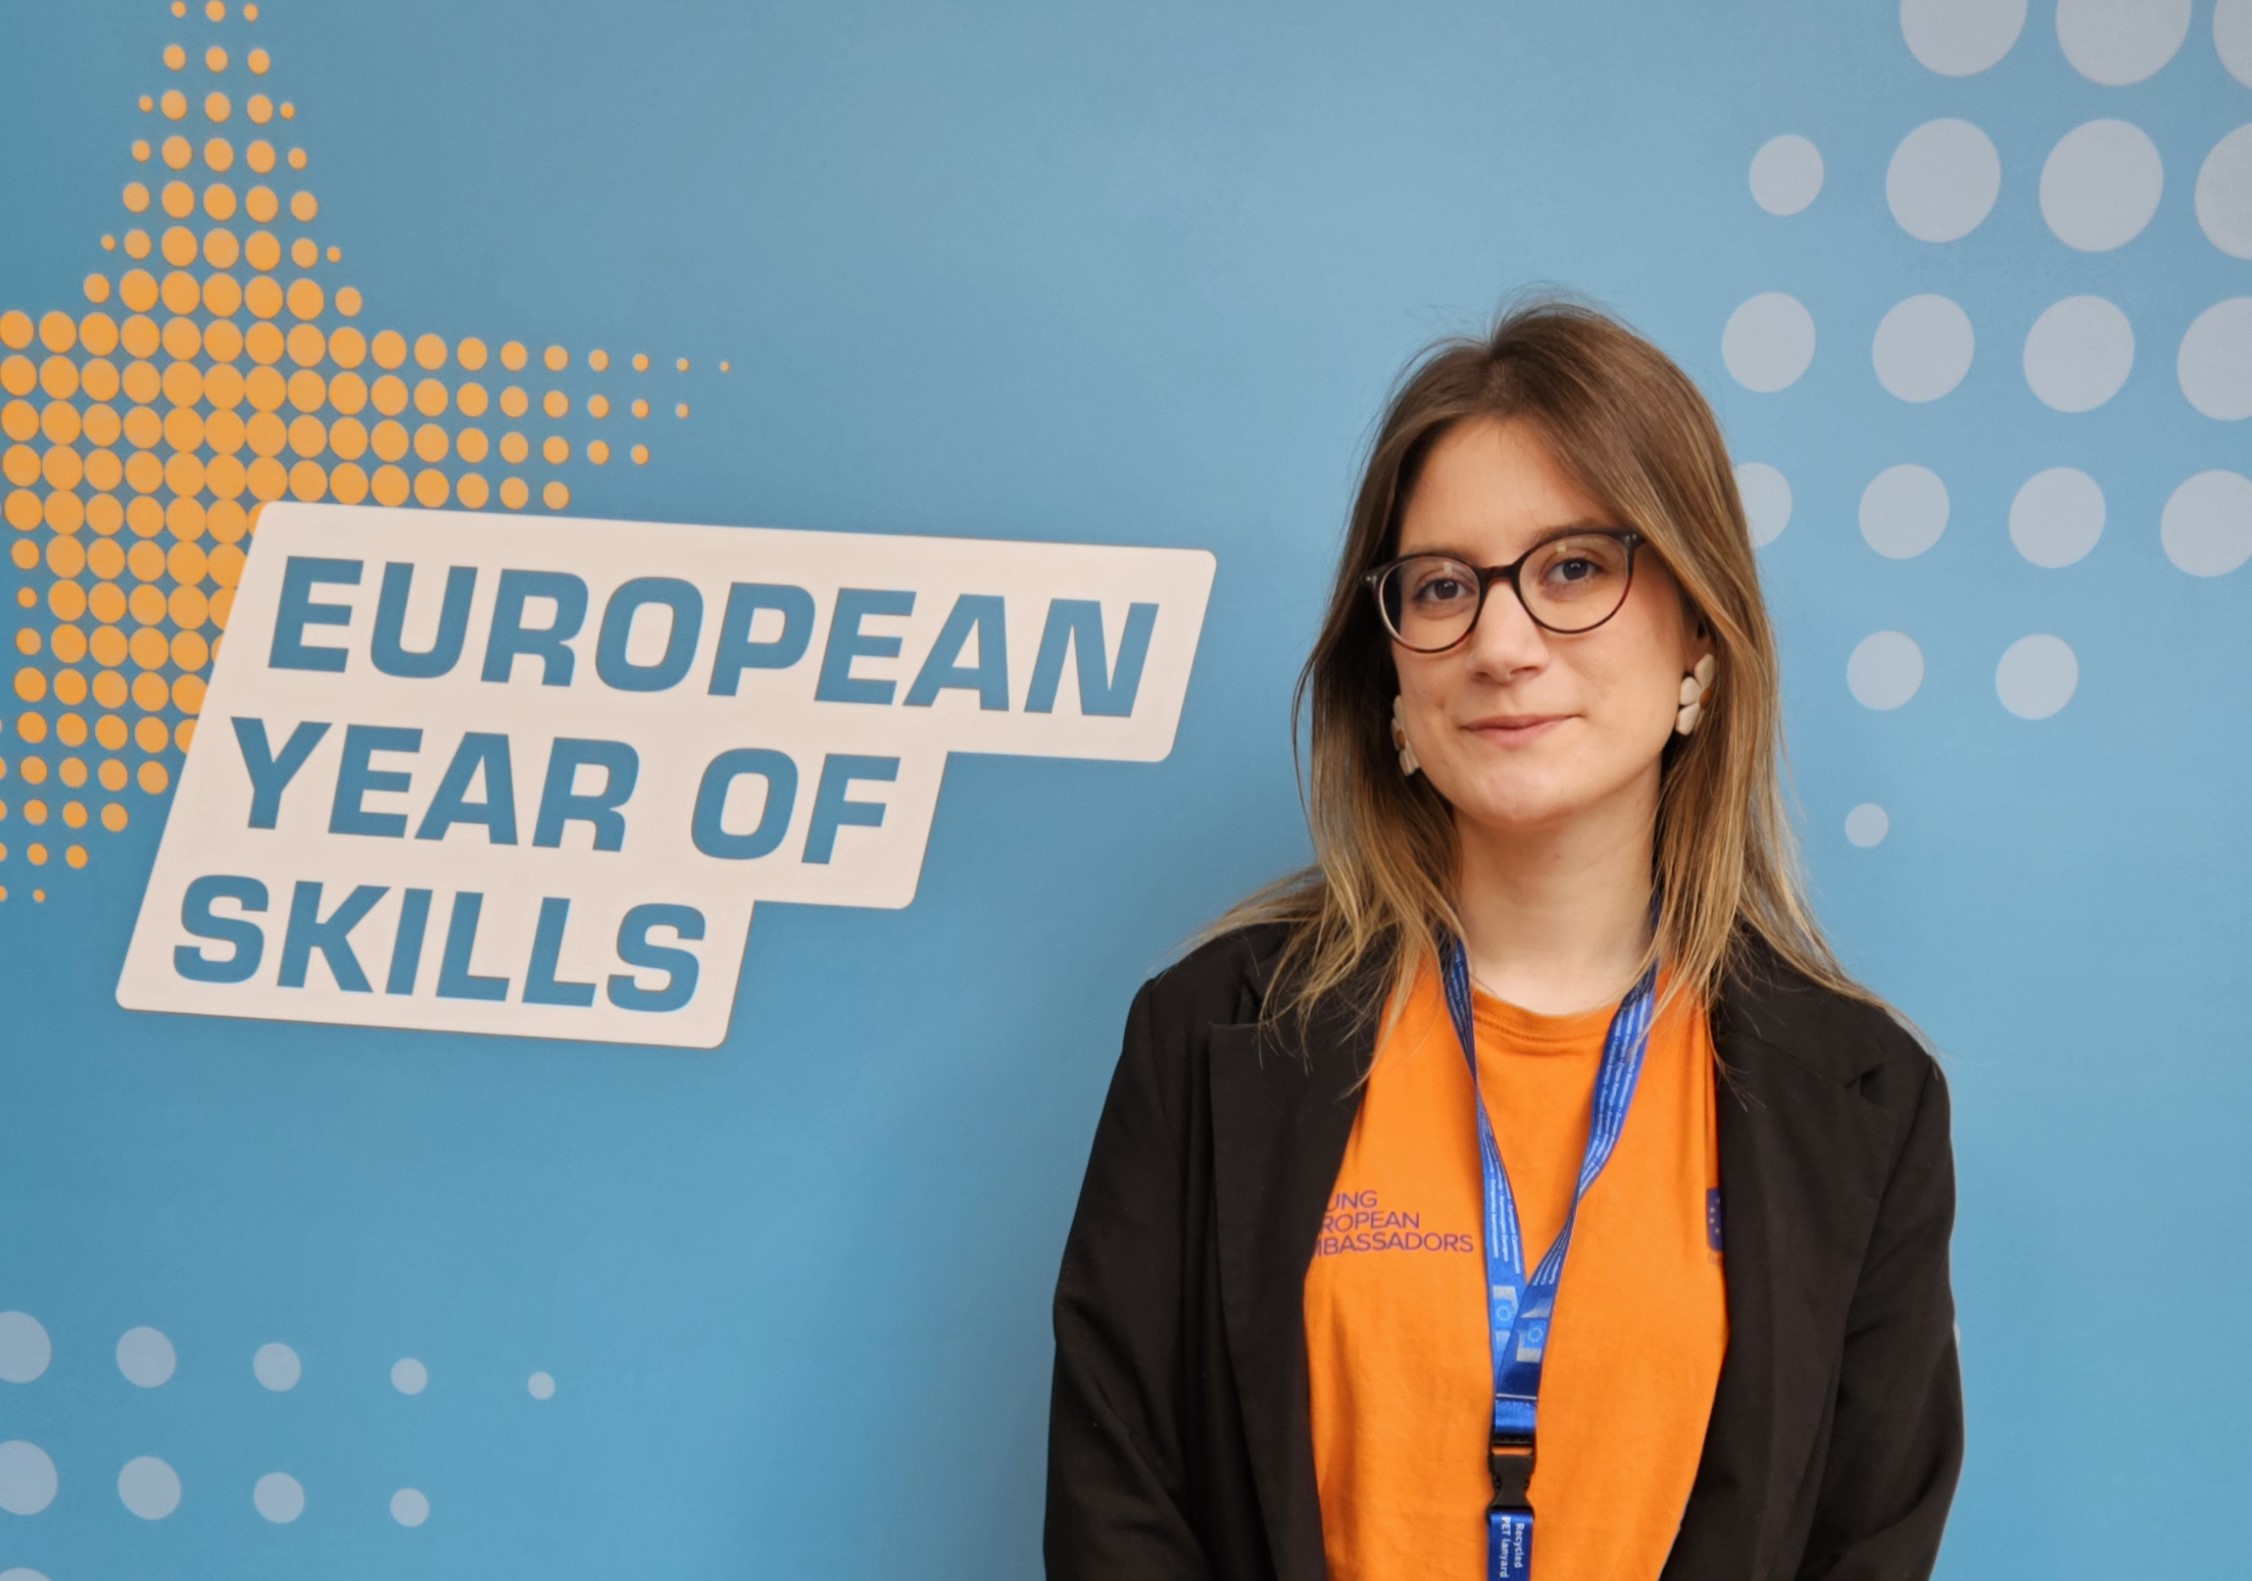 Empowering Future Leaders: Lessons from the European Year of Skills